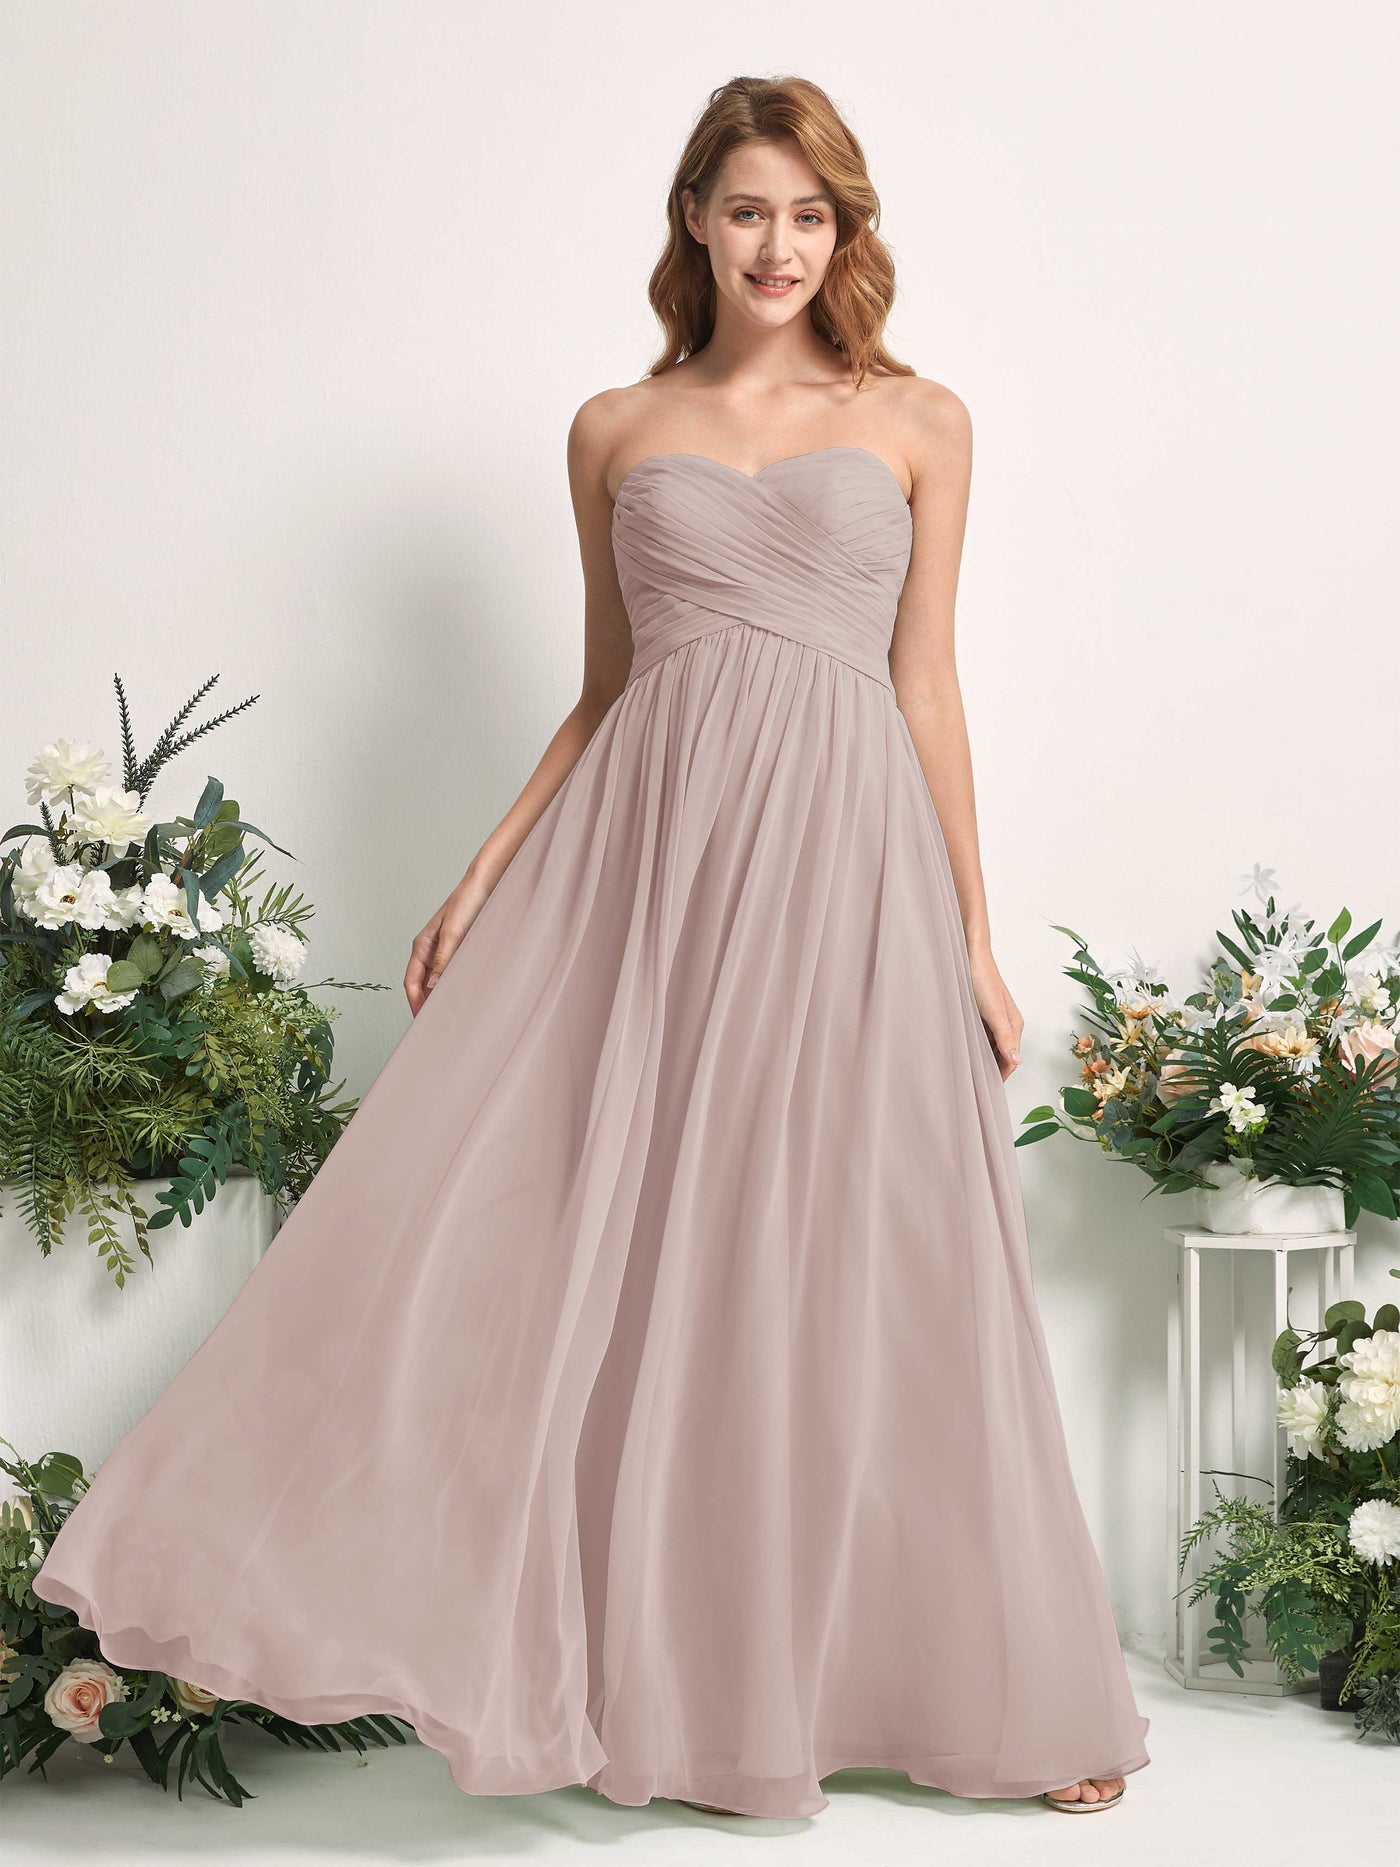 Bridesmaid Dress A-line Chiffon Sweetheart Full Length Sleeveless Wedding Party Dress - Taupe (81226924)#color_taupe